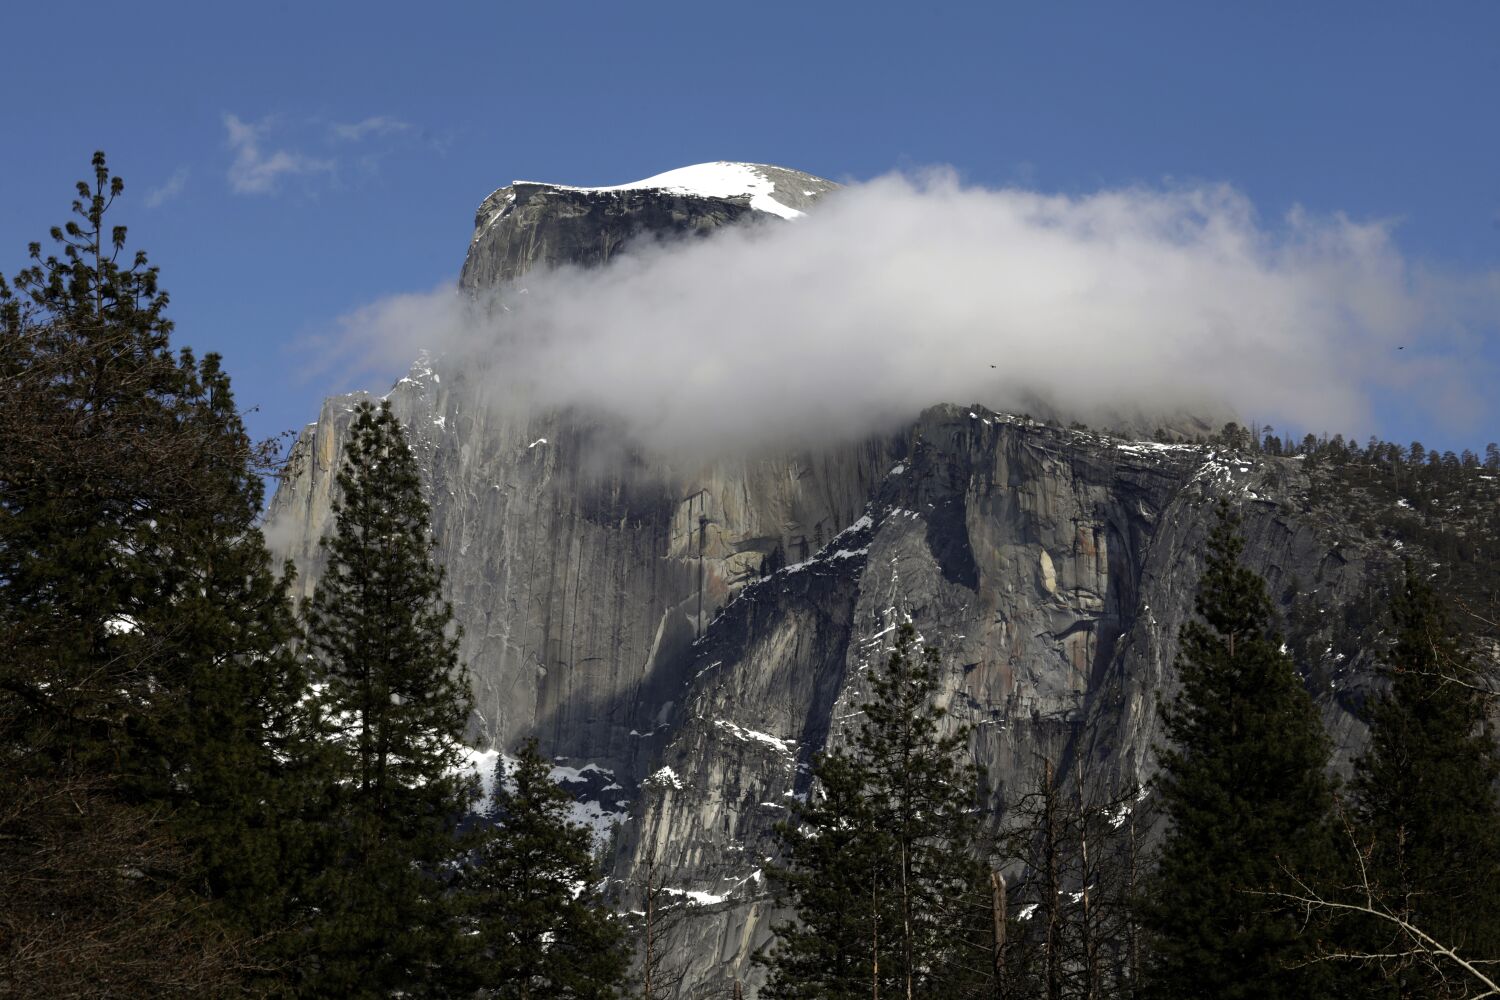 Headed to Yosemite? This might ease your drive